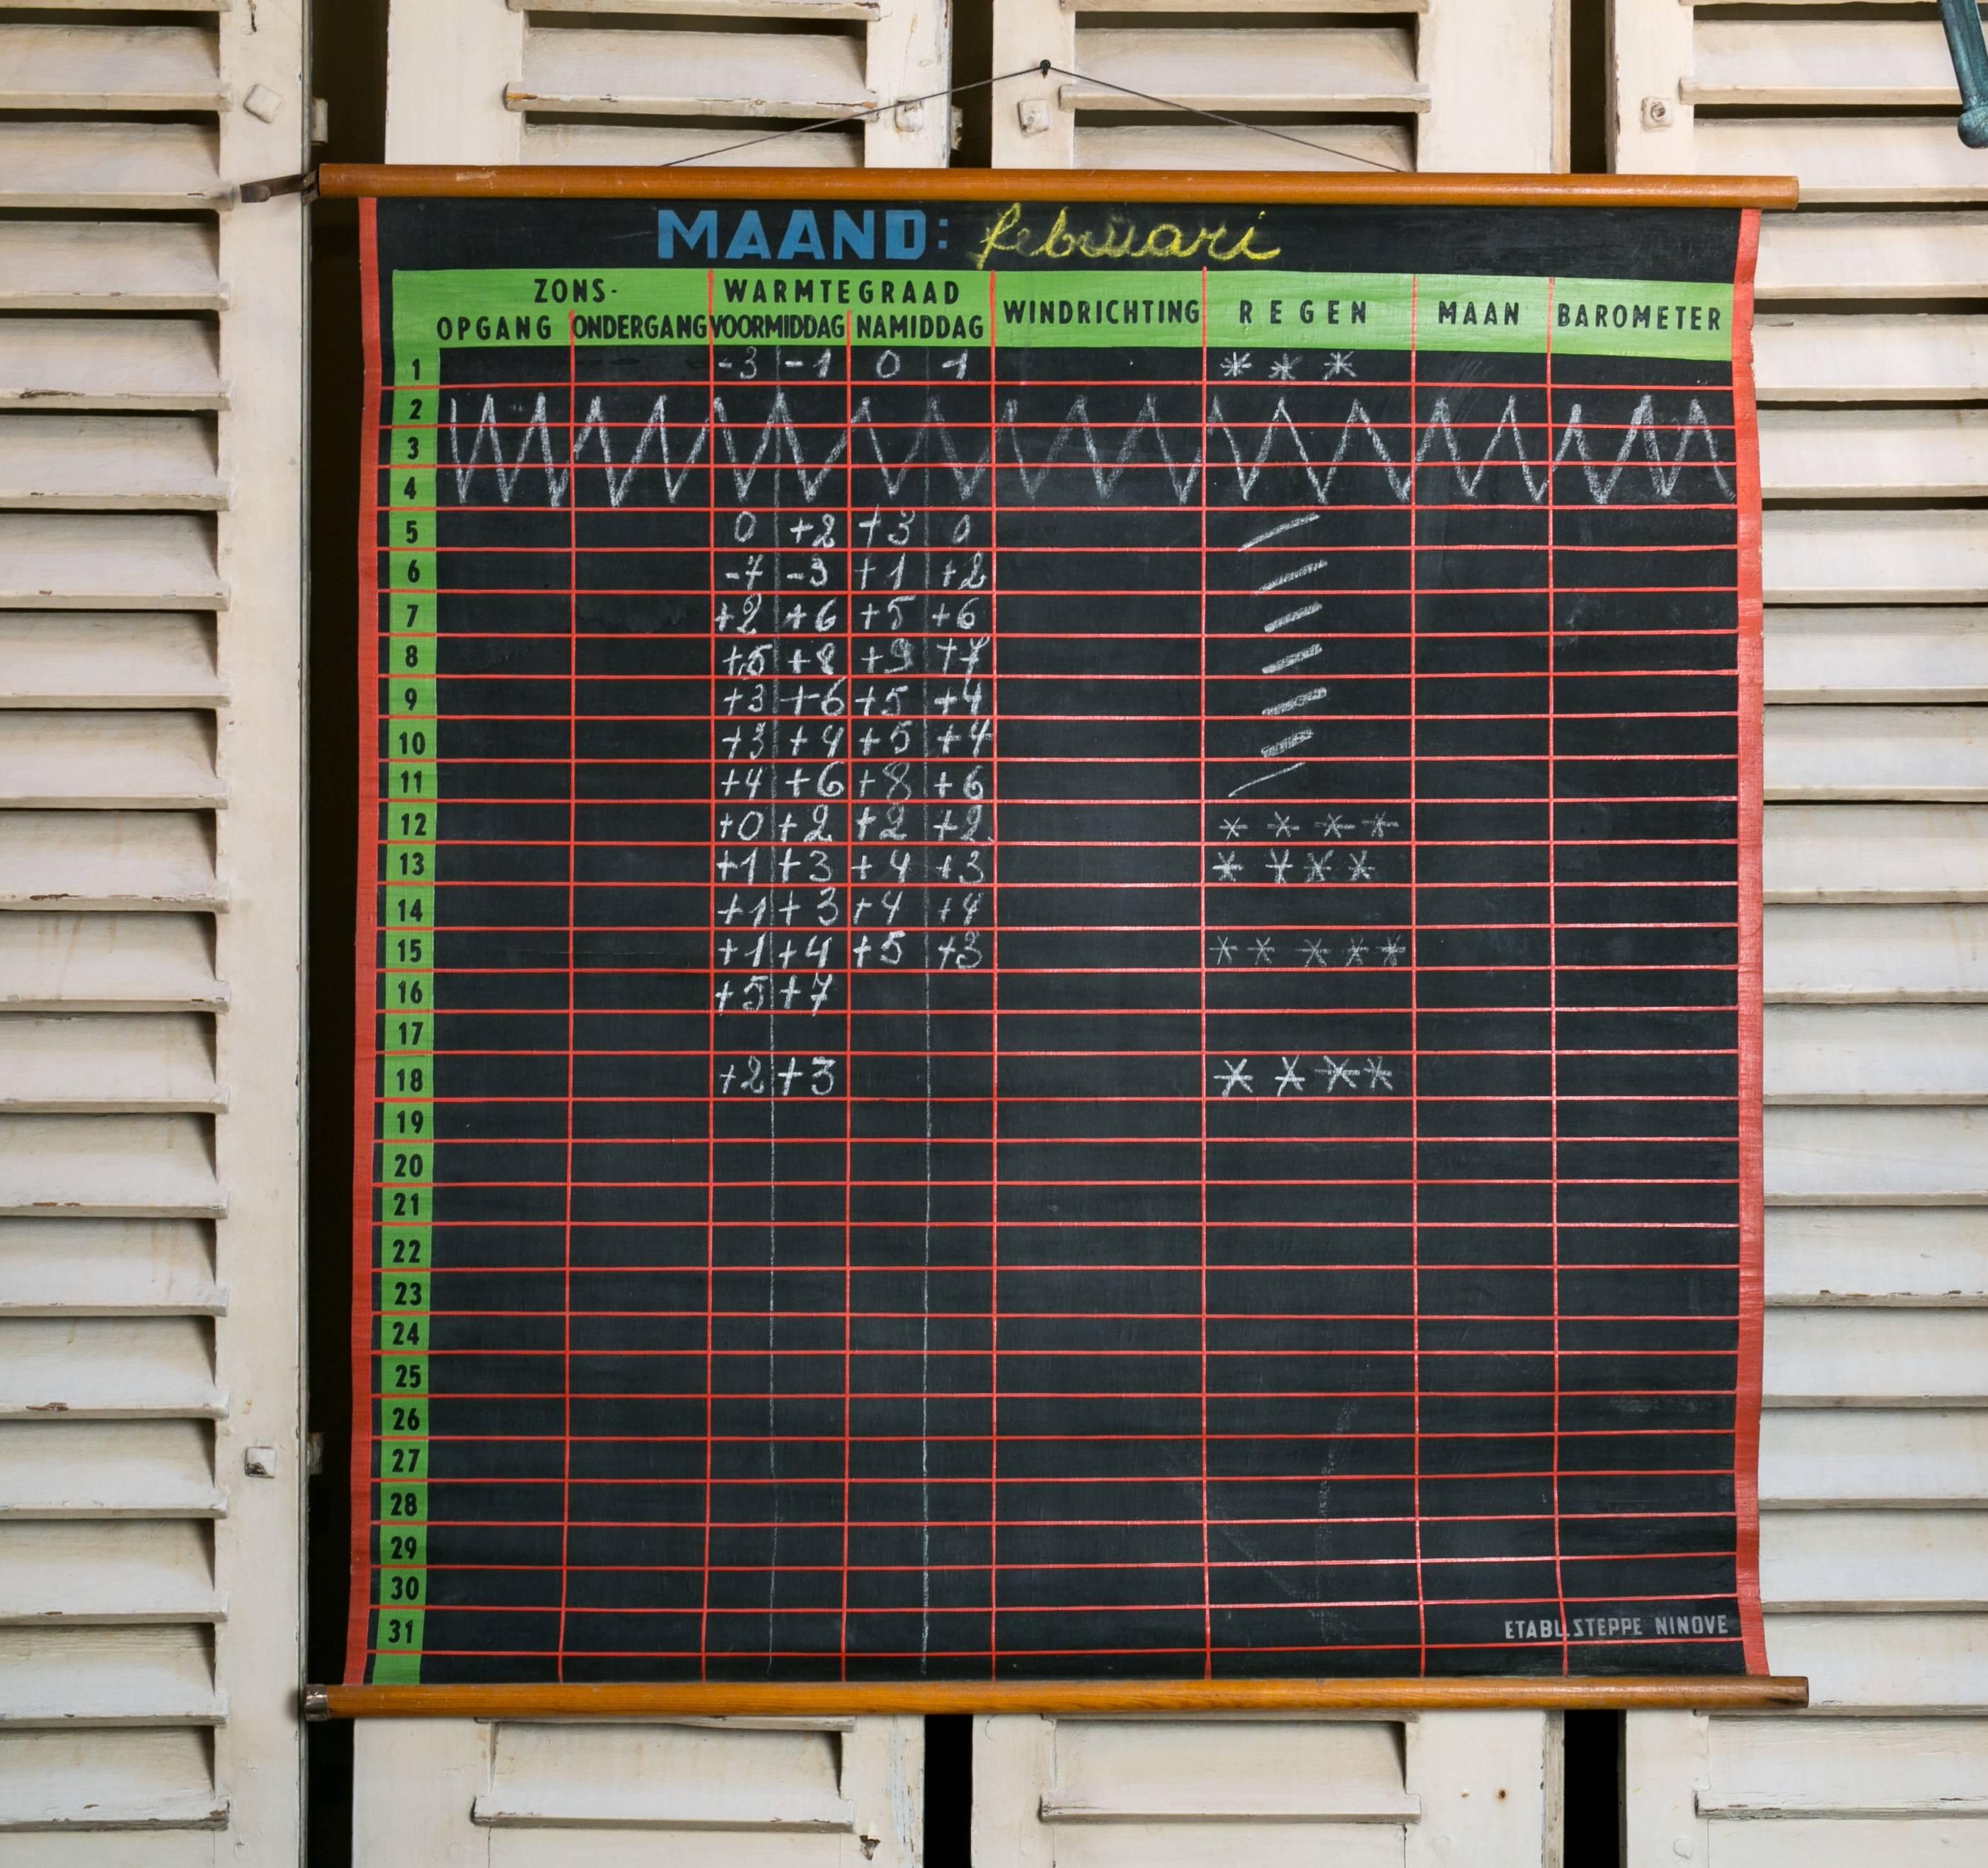 Wonderful graphic roll up chart on wooden dowel rods. Hand-painted on black canvas with original hand-written weather log for the month of February in chalk. Gridded areas designated for the day, temperature, precipitation, sunrise/set, moon phase